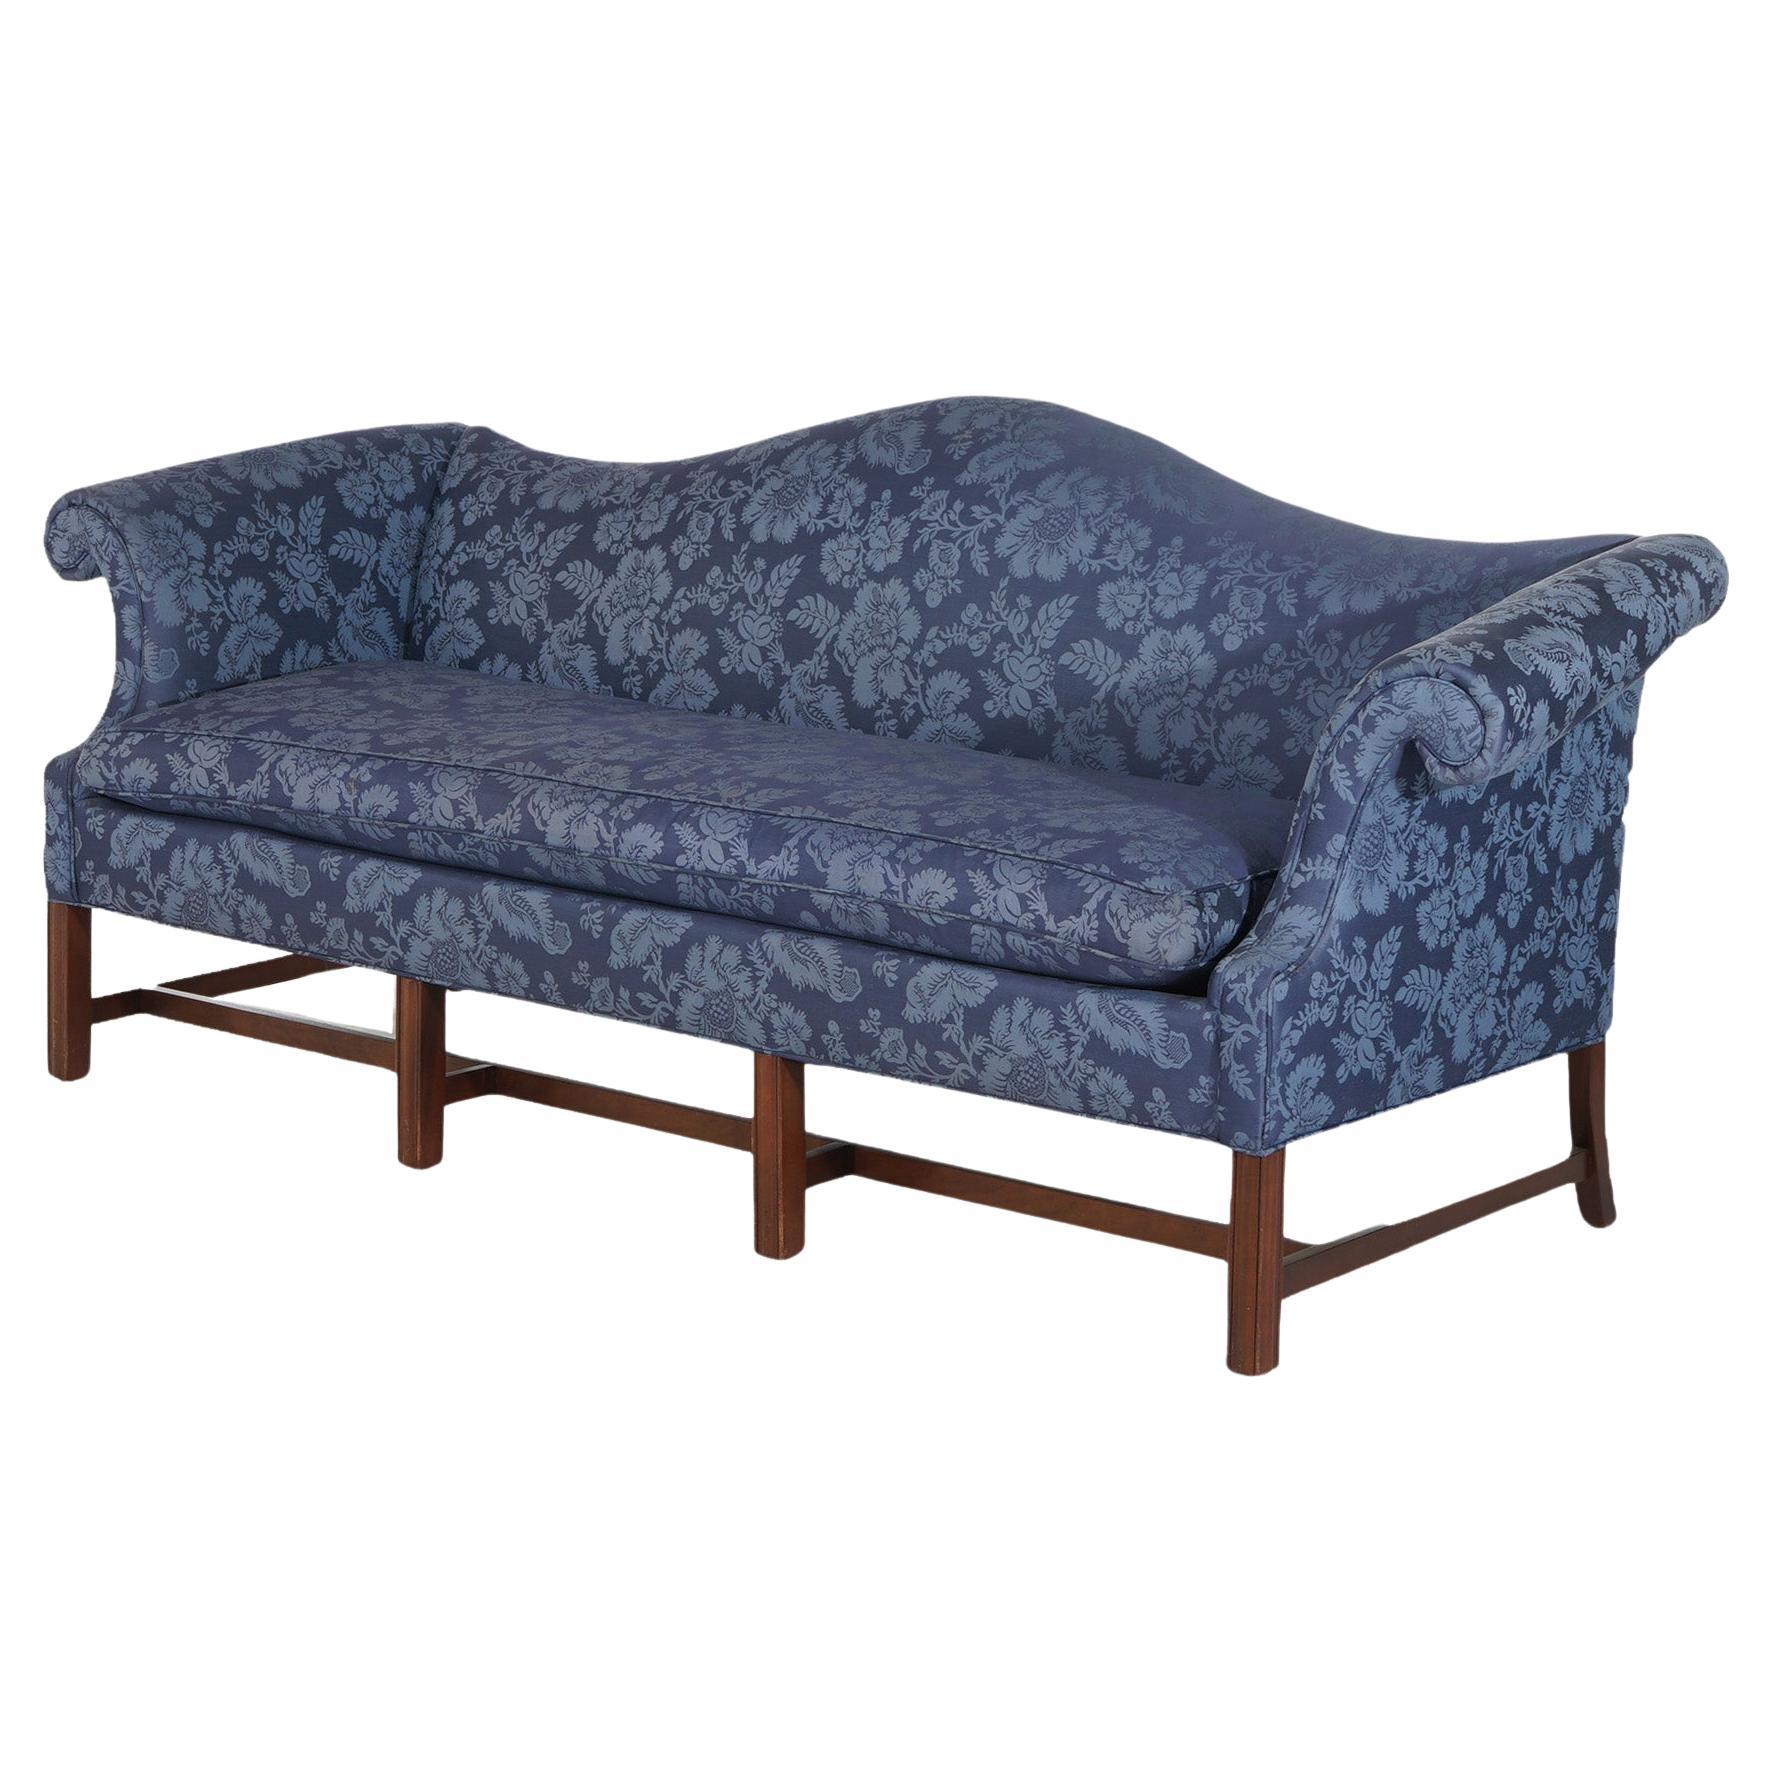 Antique Chippendale Camelback Sofa with Scroll Arms, Blue, C1930